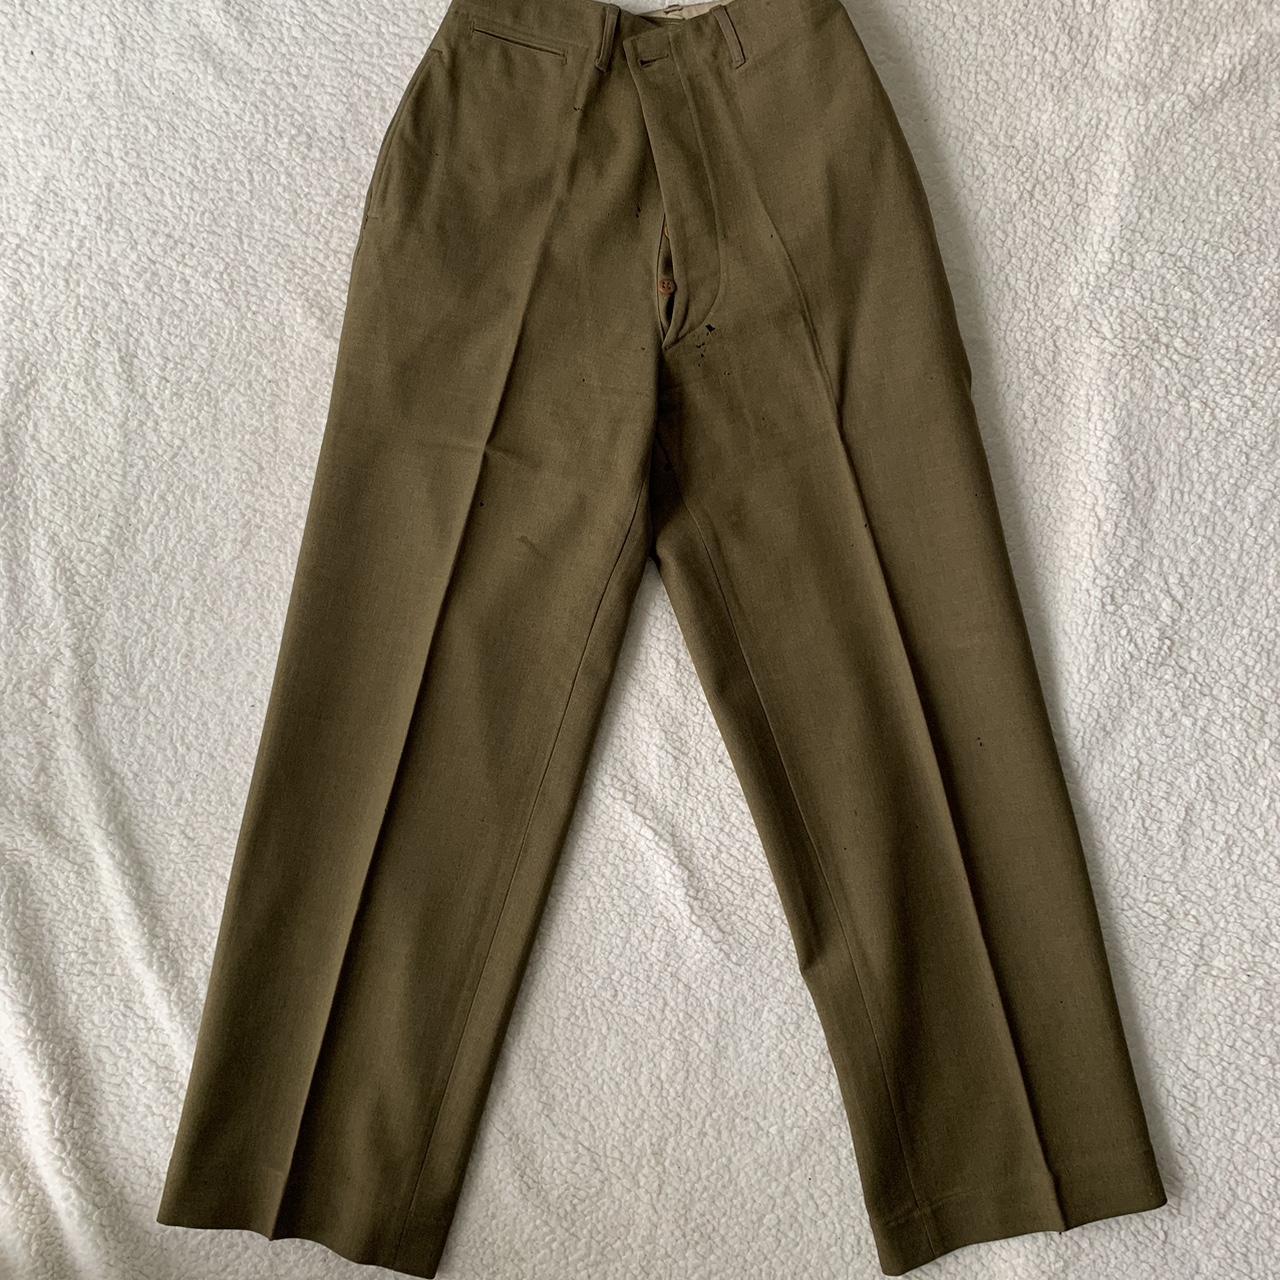 Vintage Spanish Army Olive Green Wool Combat Trousers - NEW - Waist 28 –  Pools Surplus Stores